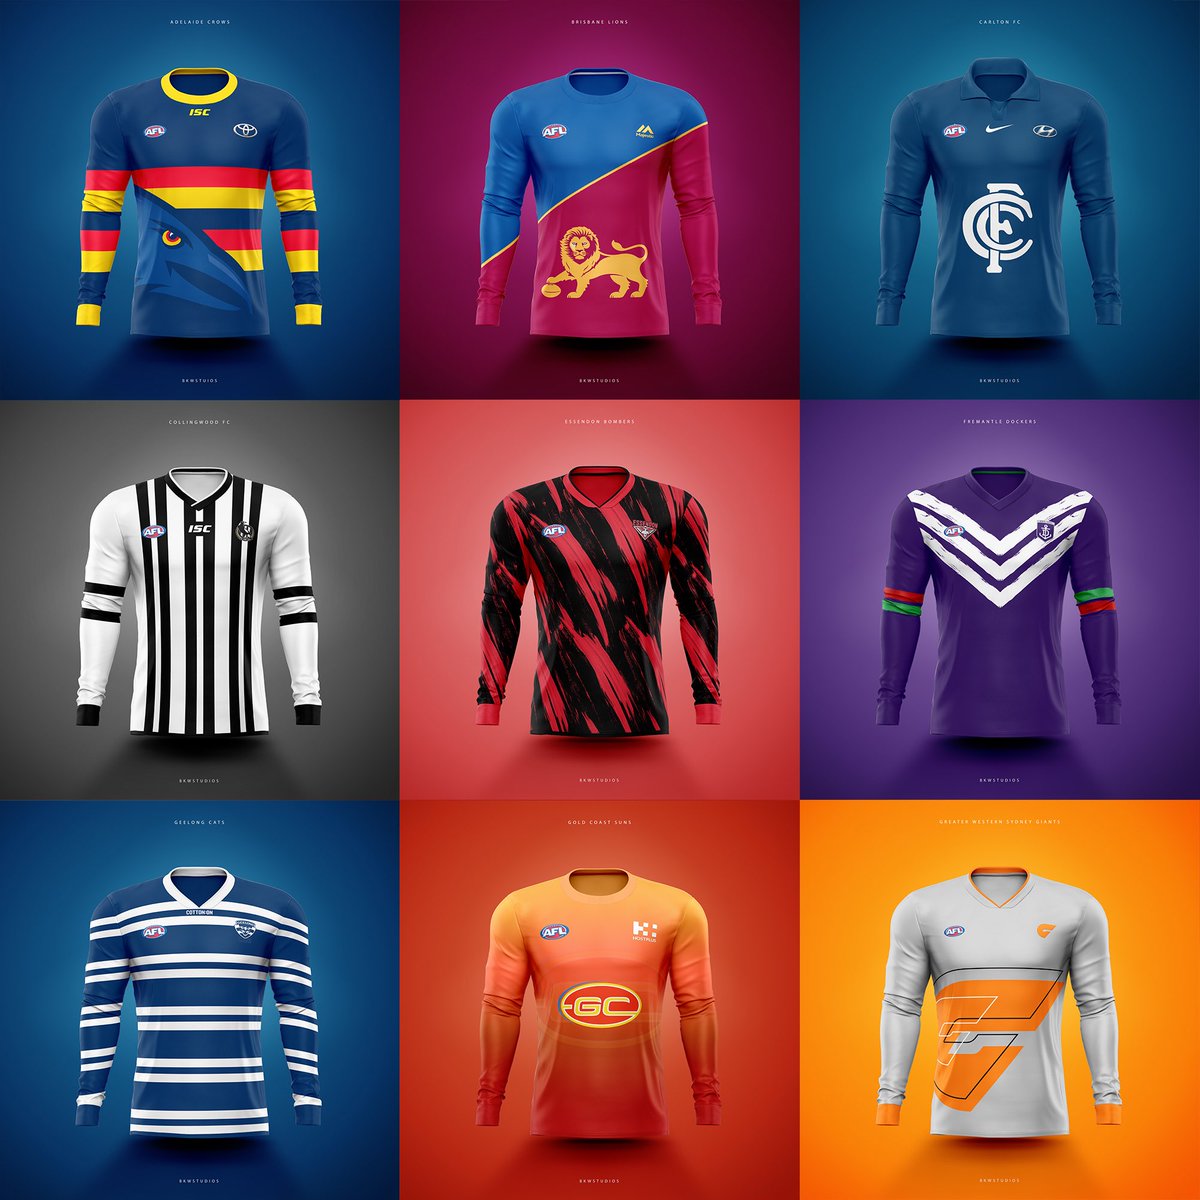 These long-sleeve guernsey designs are 